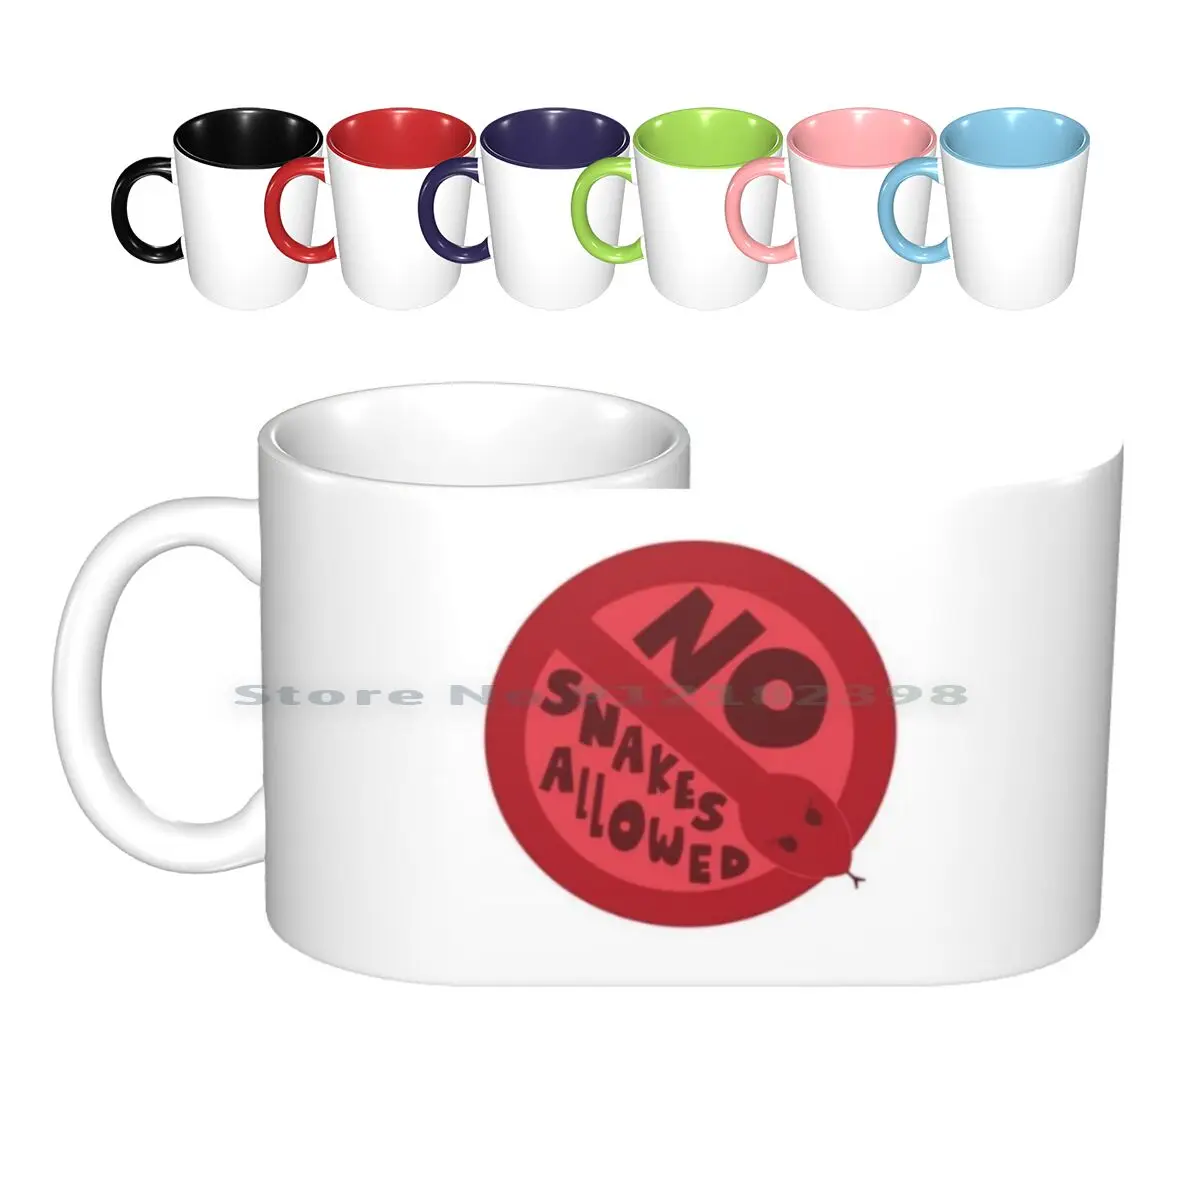 

No Snakes Allowed! Ceramic Mugs Coffee Cups Milk Tea Mug Meme Memes No Snakes Allowed Creative Trending Vintage Gift Bottle Cup